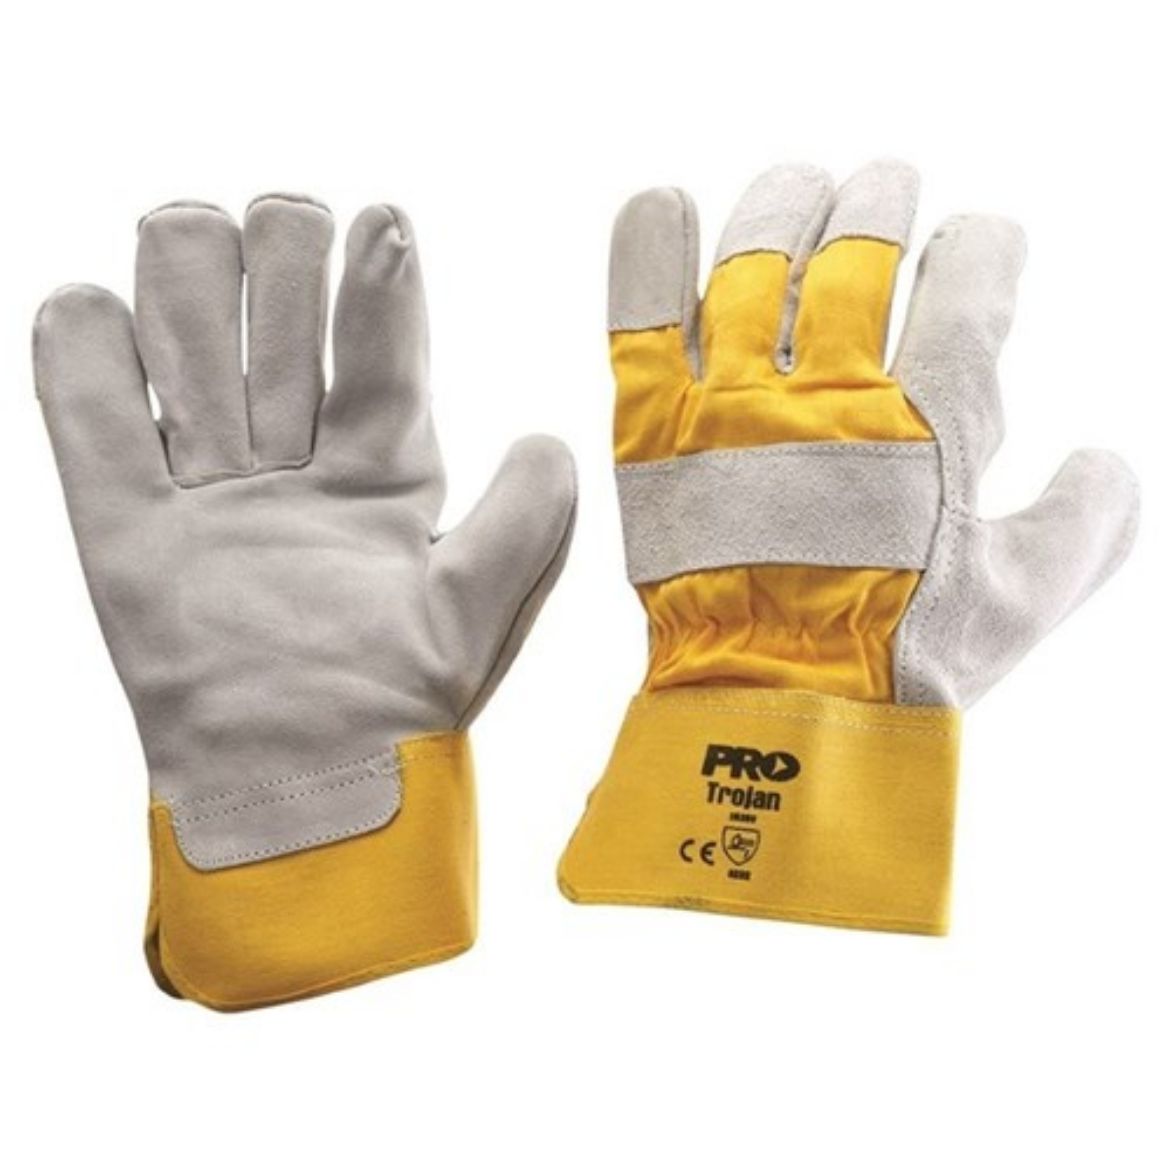 Picture of YELLOW COTTON BACK/COWSPLIT LEATHER PALM GLOVES - HEAVY DUTY - ONE SIZE FITS MOST. MOQ - 12.